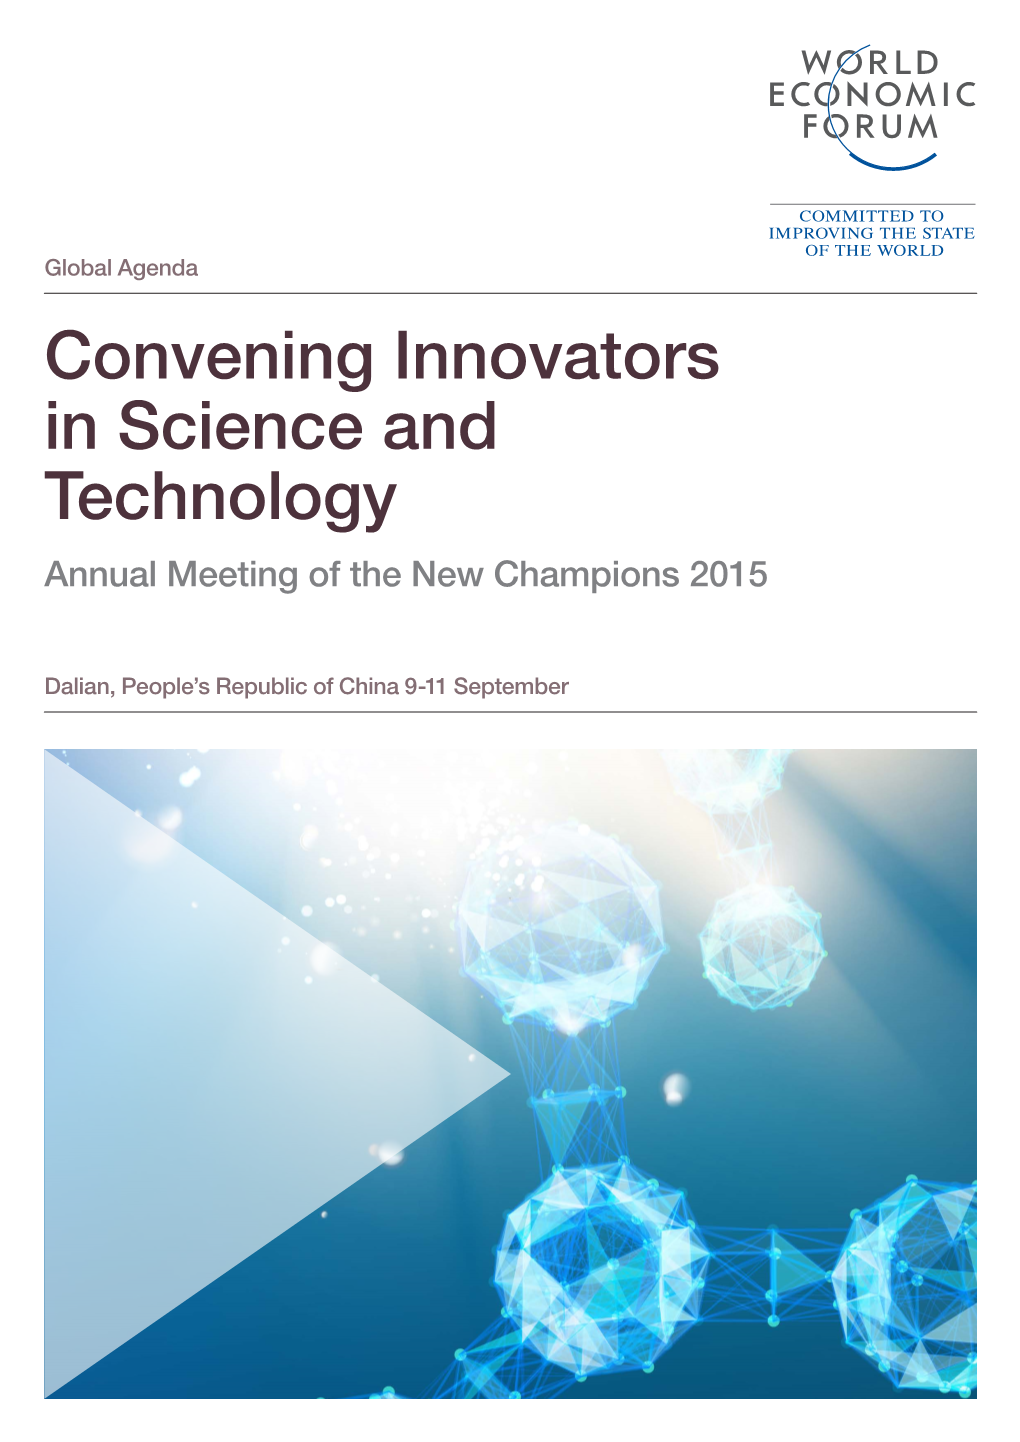 Convening Innovators in Science and Technology Annual Meeting of the New Champions 2015